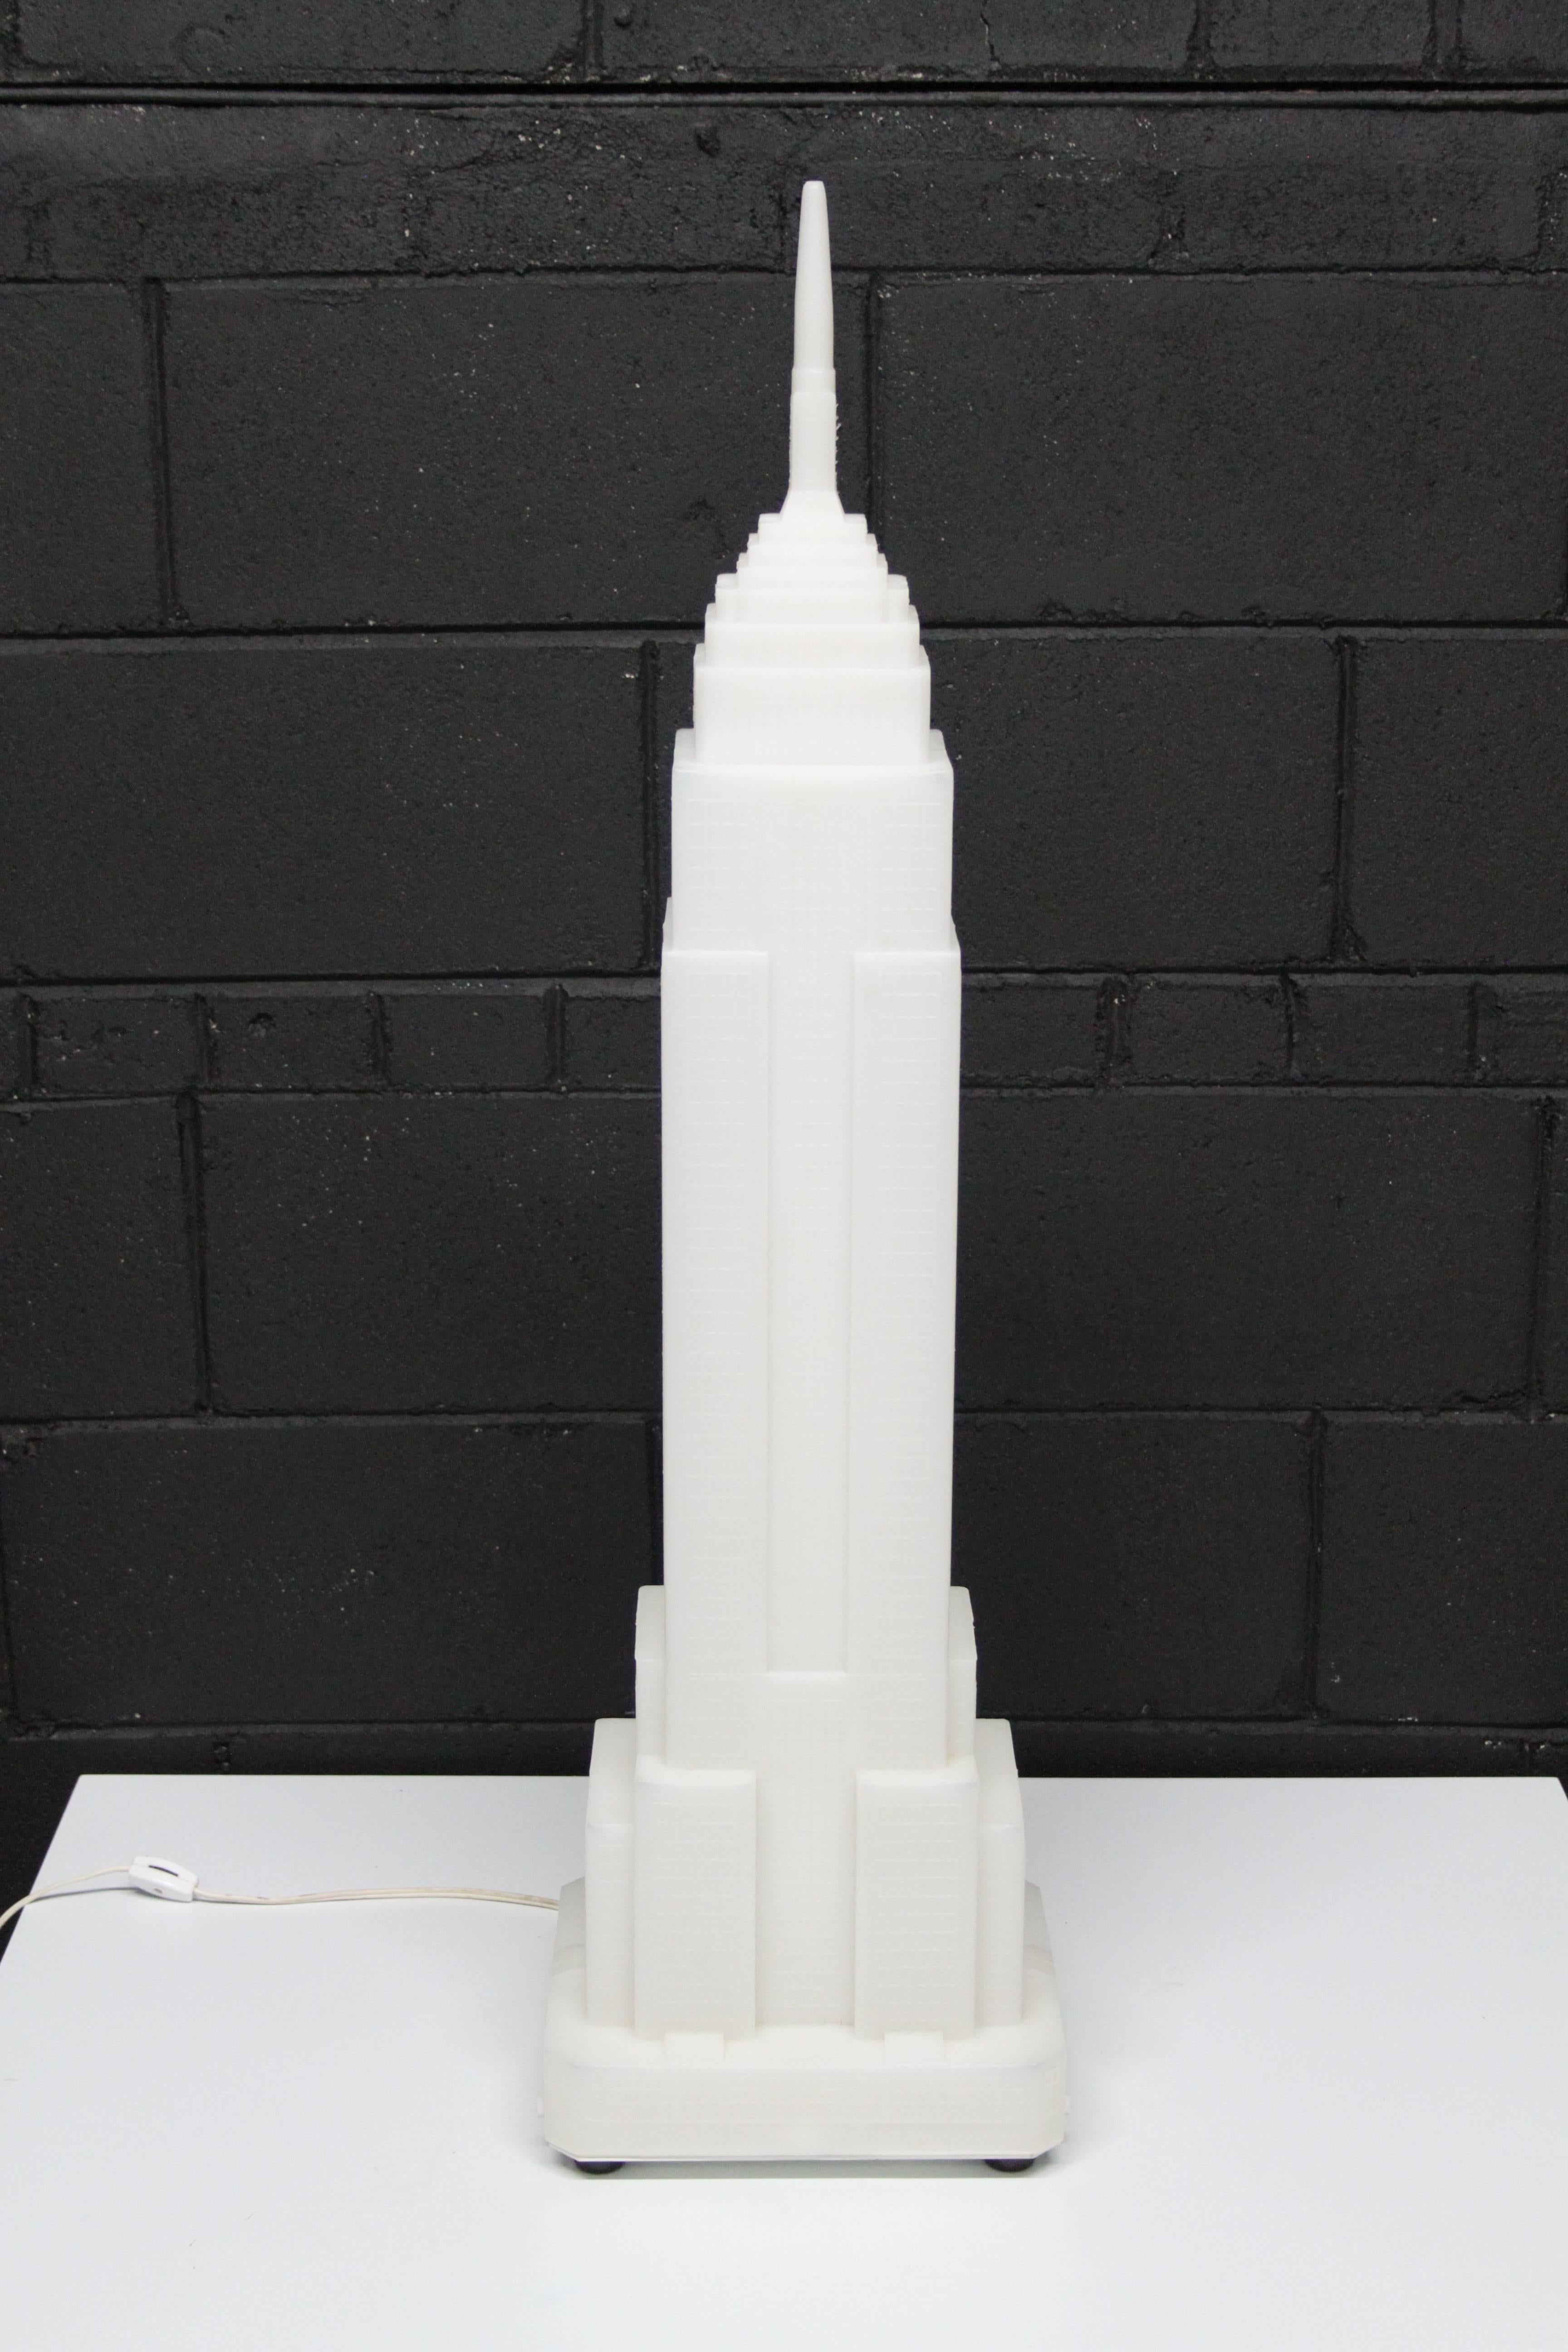 Takahashi Denson designed opaque plastic architectural model lamp in the form of the Empire State Building. Stamped Midori, Japan, 20th century, circa 1980s. Currently has a pink tone bulb. No cracks or breaks. Great pop art sculpture of the Art